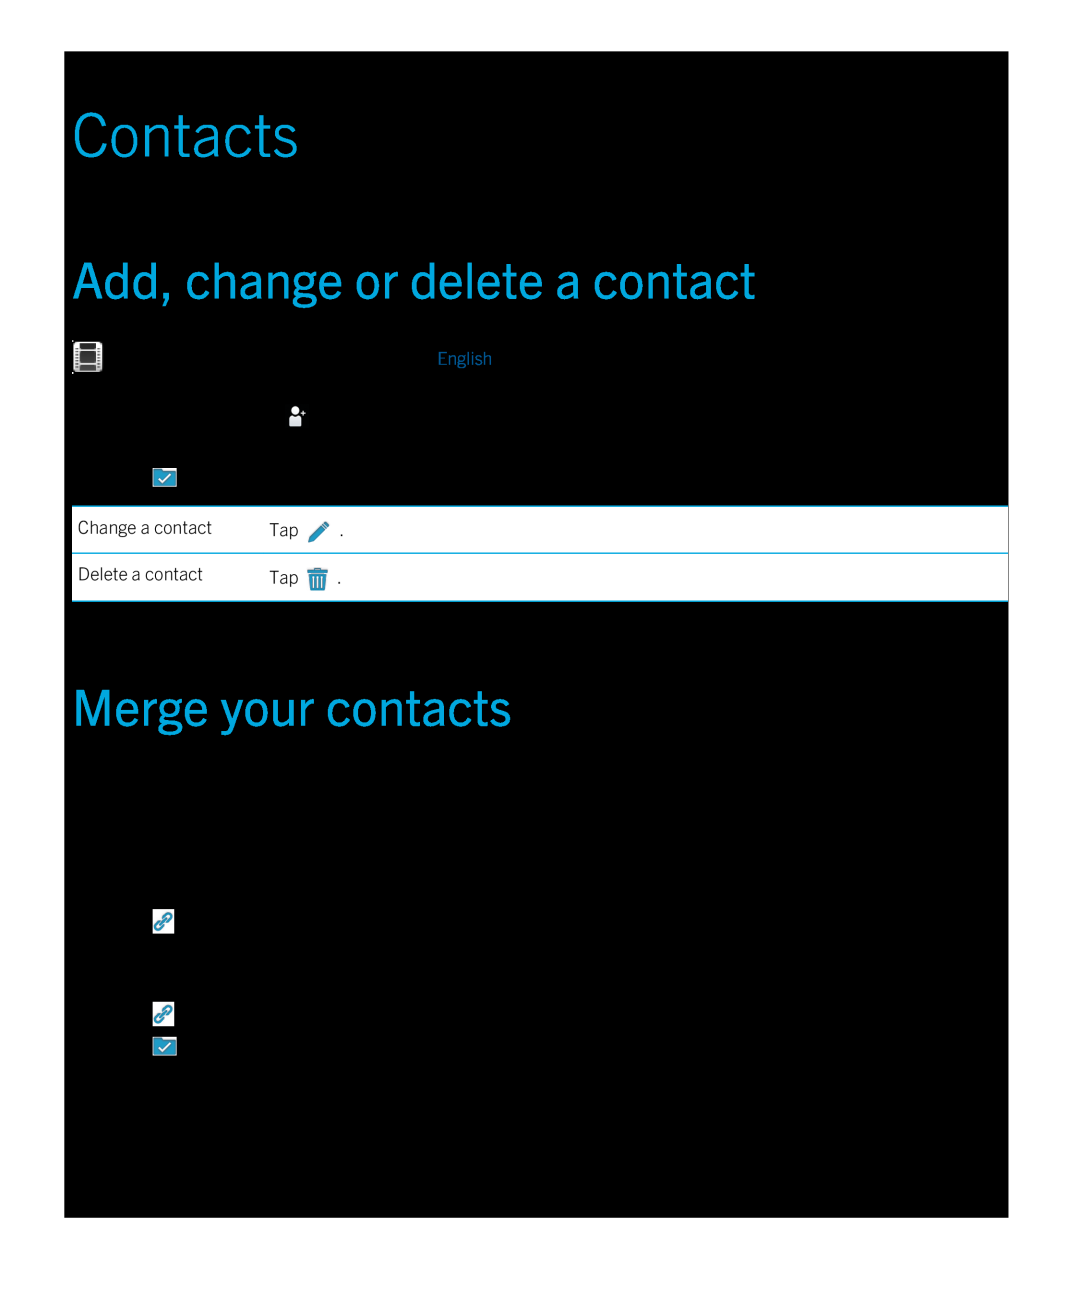 Blackberry 2.0.1 manual Contacts, Add, change or delete a contact, Merge your contacts, Tap Add Link 